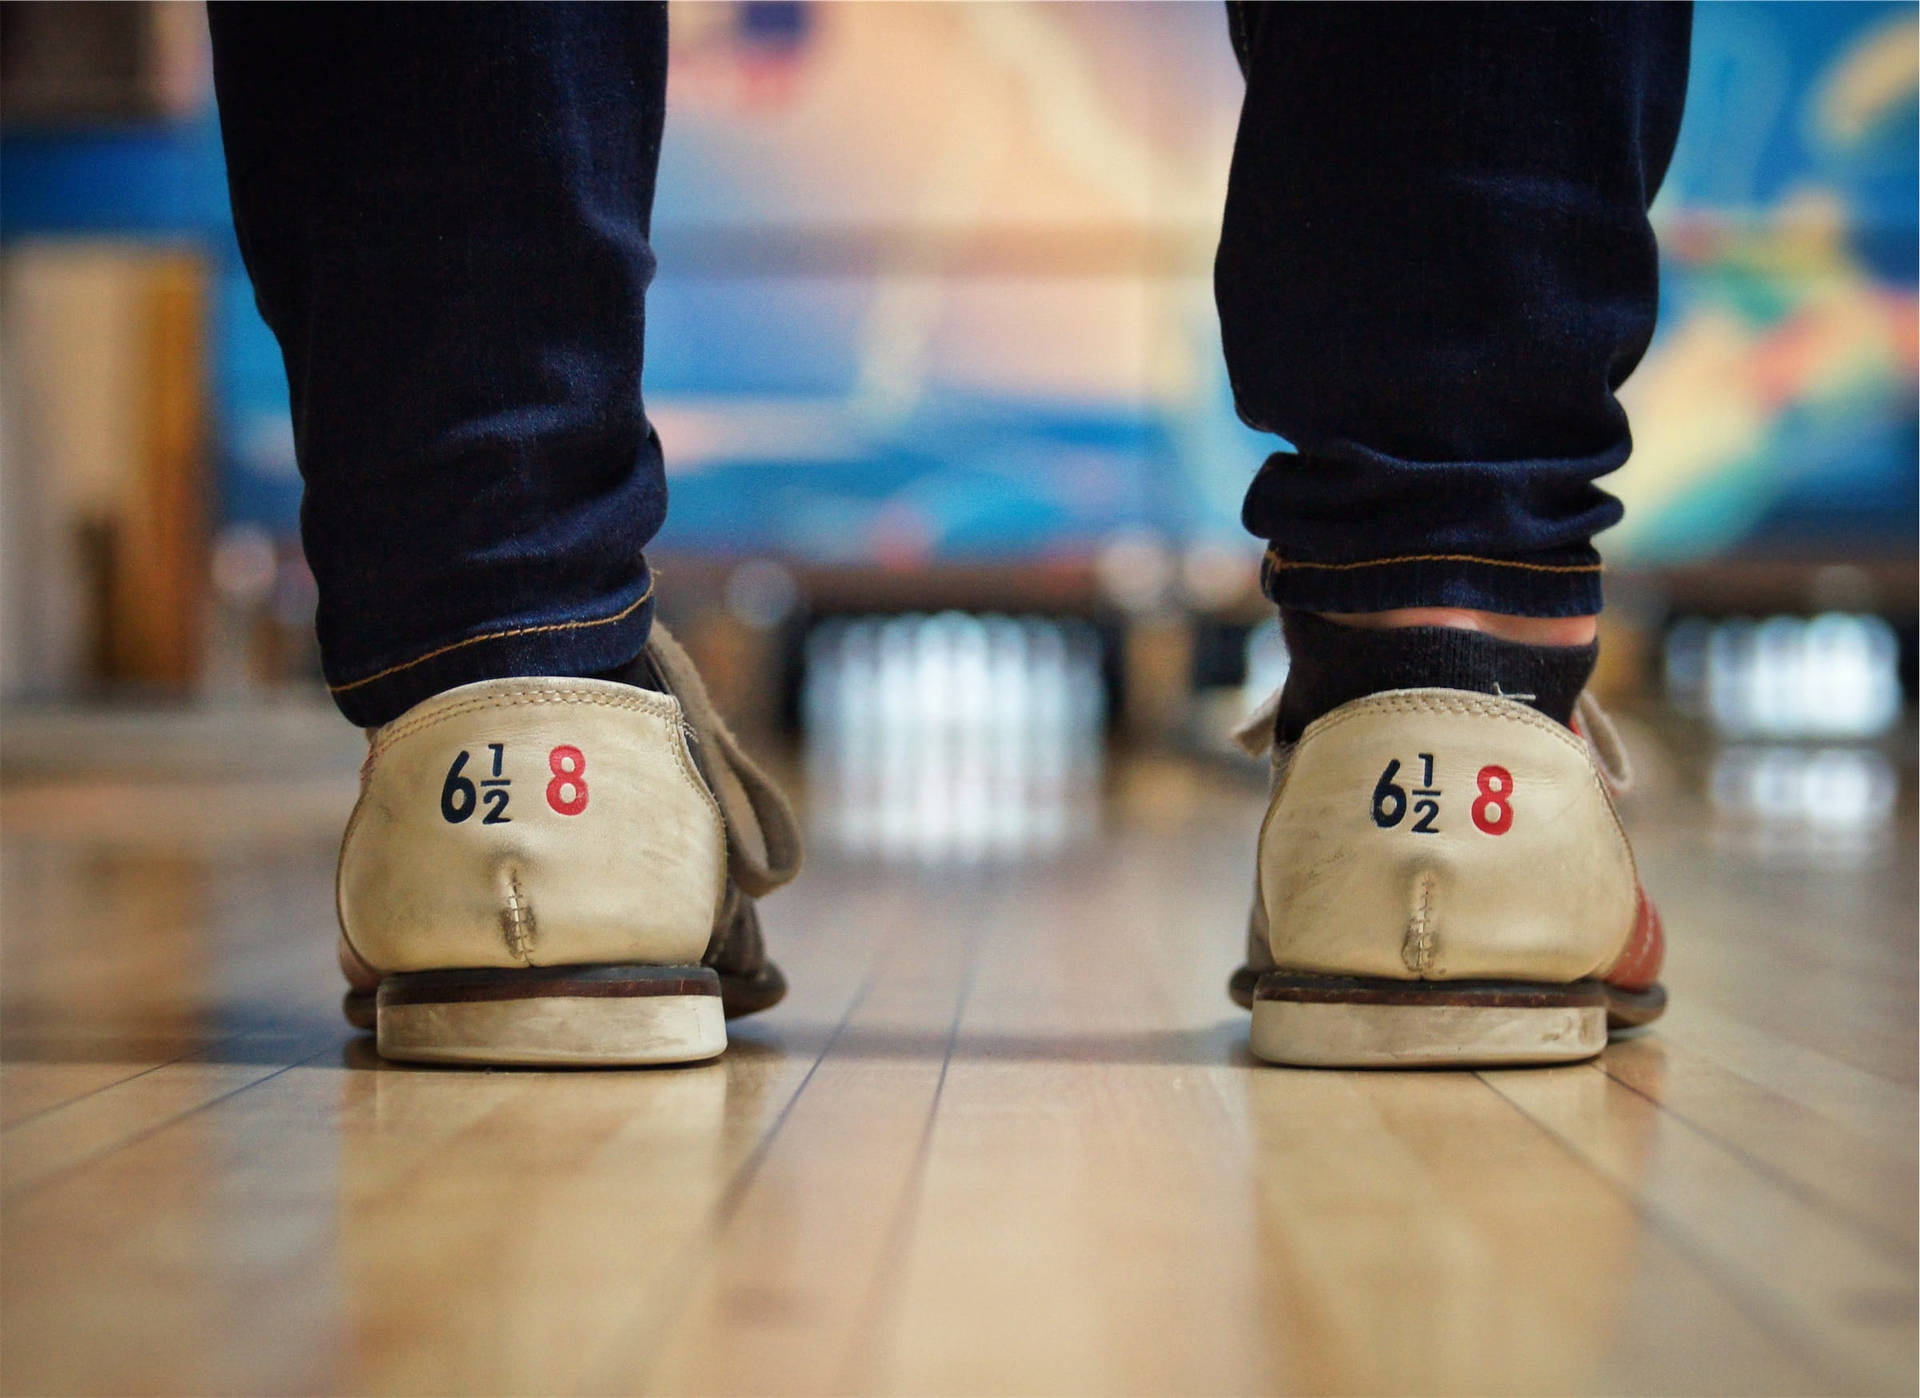 A Pair Of Bowling Shoes On The Floor